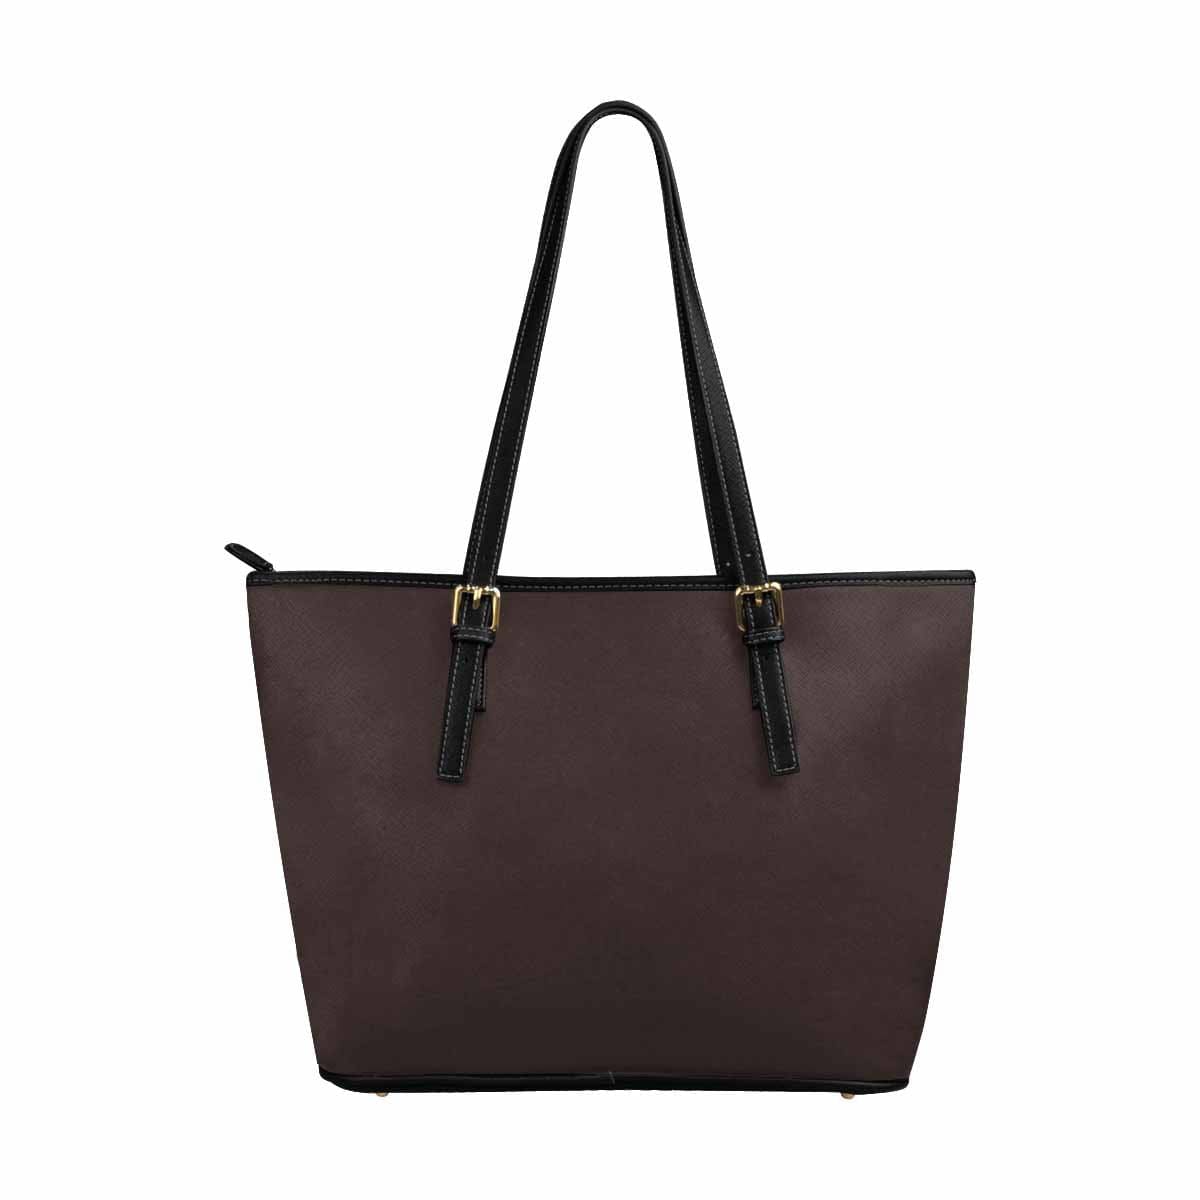 Large Leather Tote Shoulder Bag - Carafe Brown - Bags | Leather Tote Bags